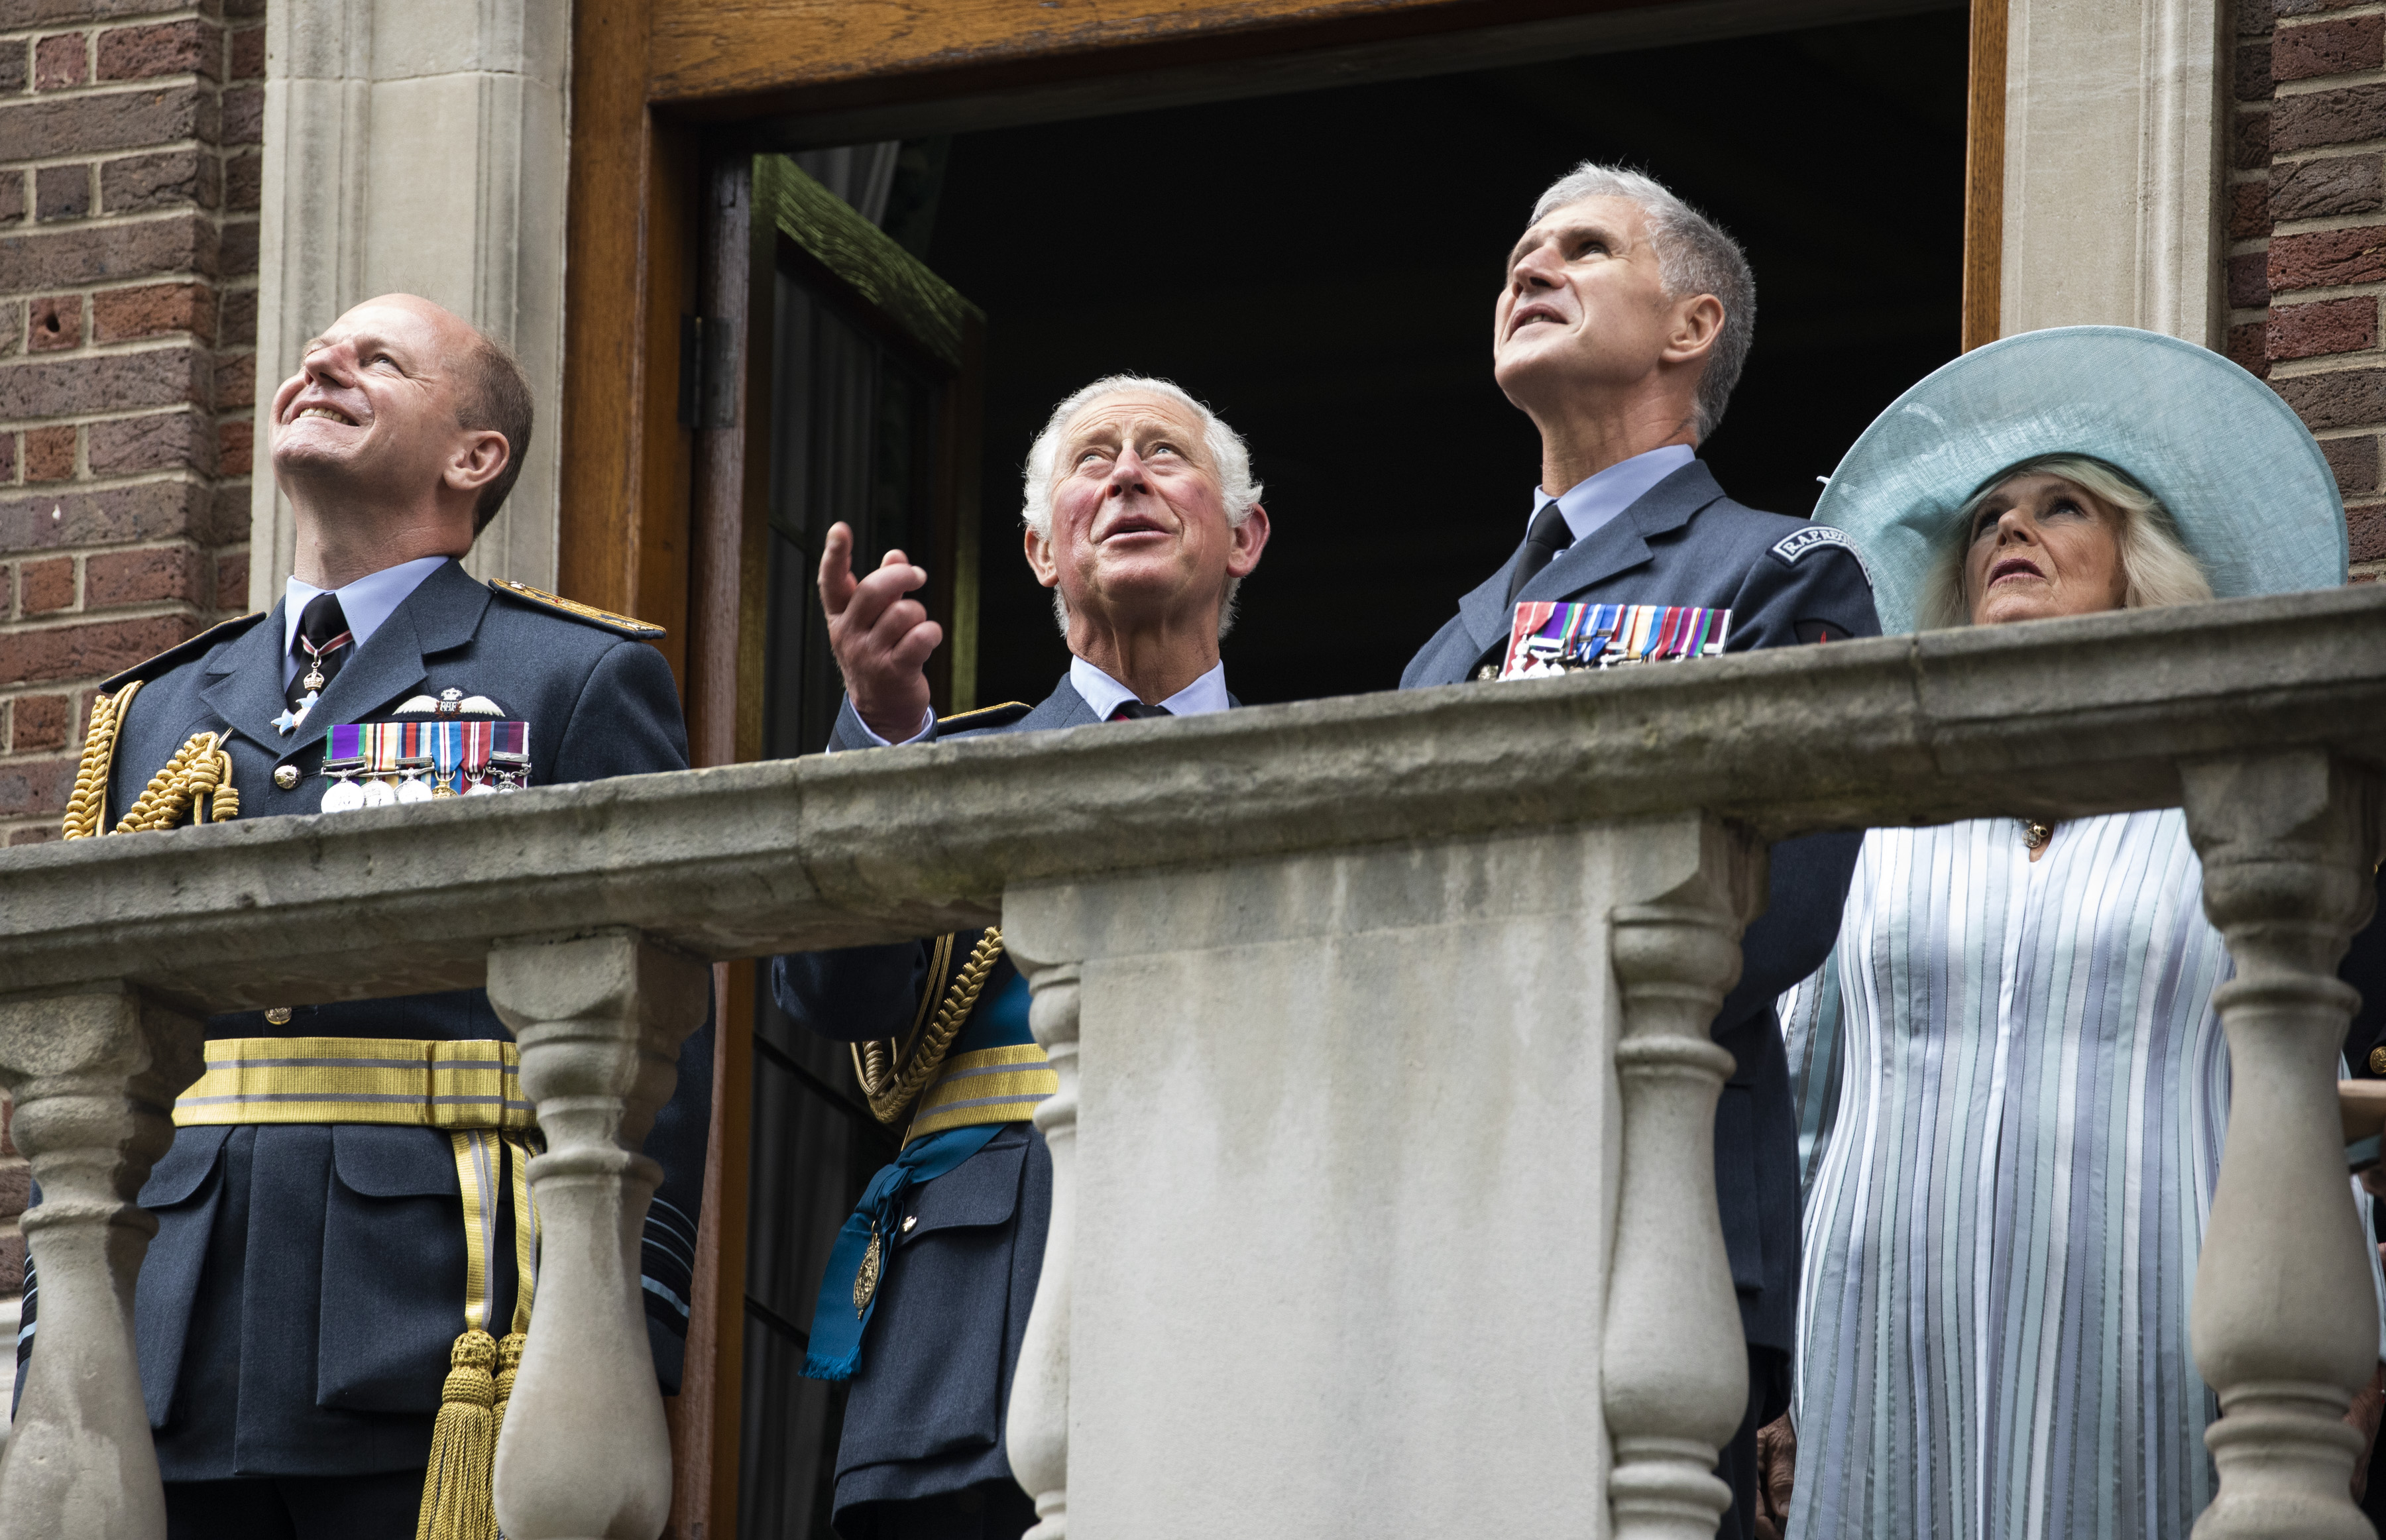 Their Royal Highnesses and Chief of the Air Staff stand on balcony looking up to flypast.